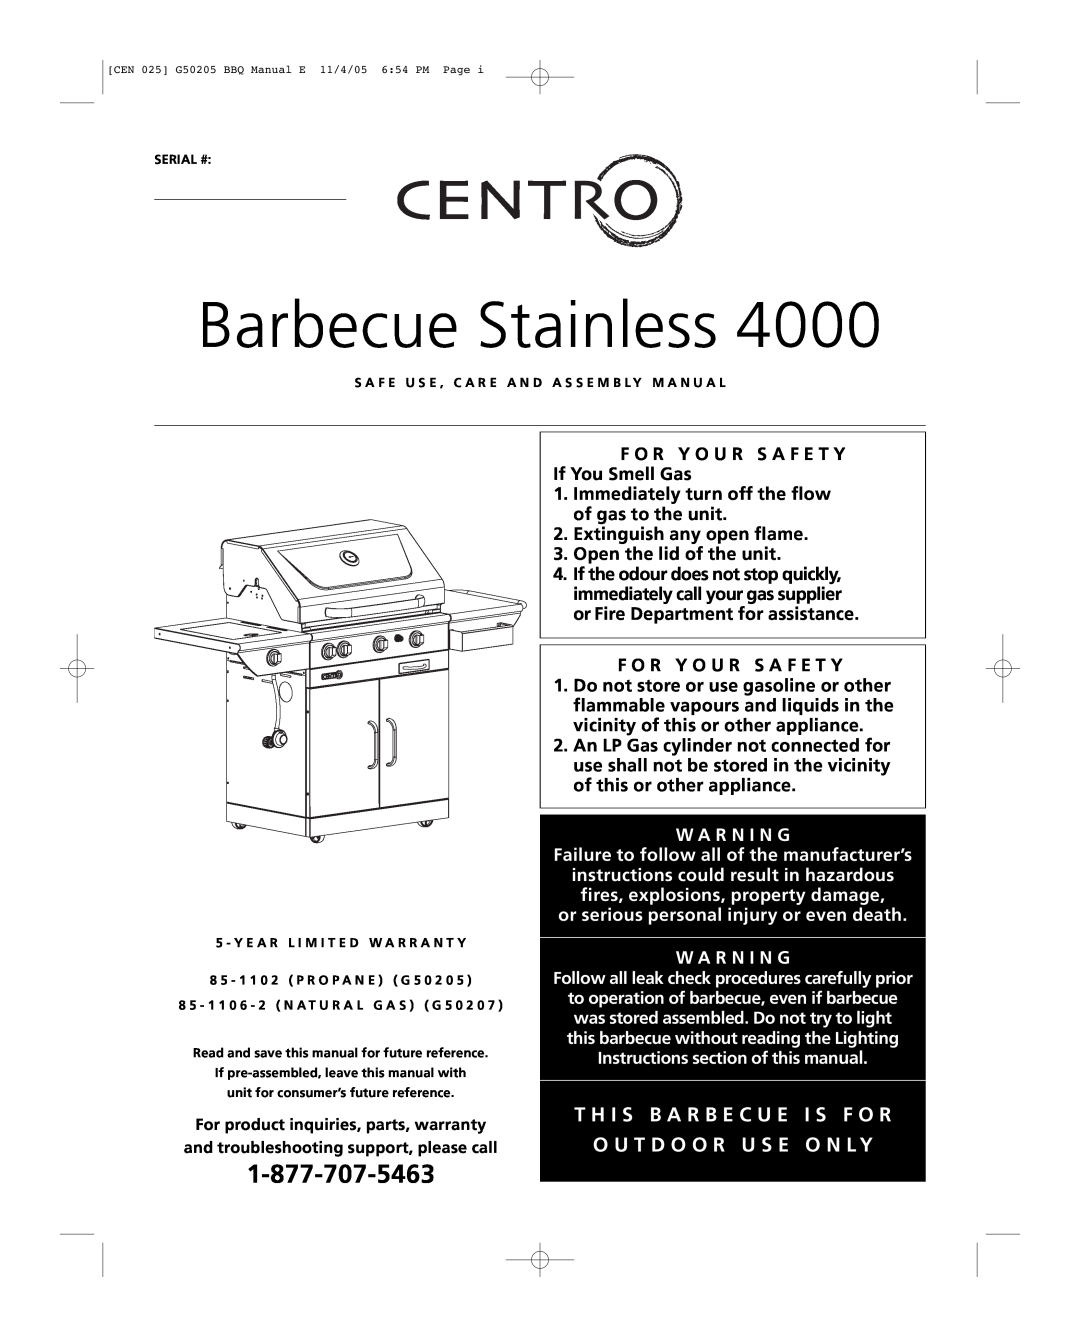 Centro G50205 warranty Barbecue Stainless, T H I S B A R B E C U E I S F O R O U T D O O R U S E O N L Y 